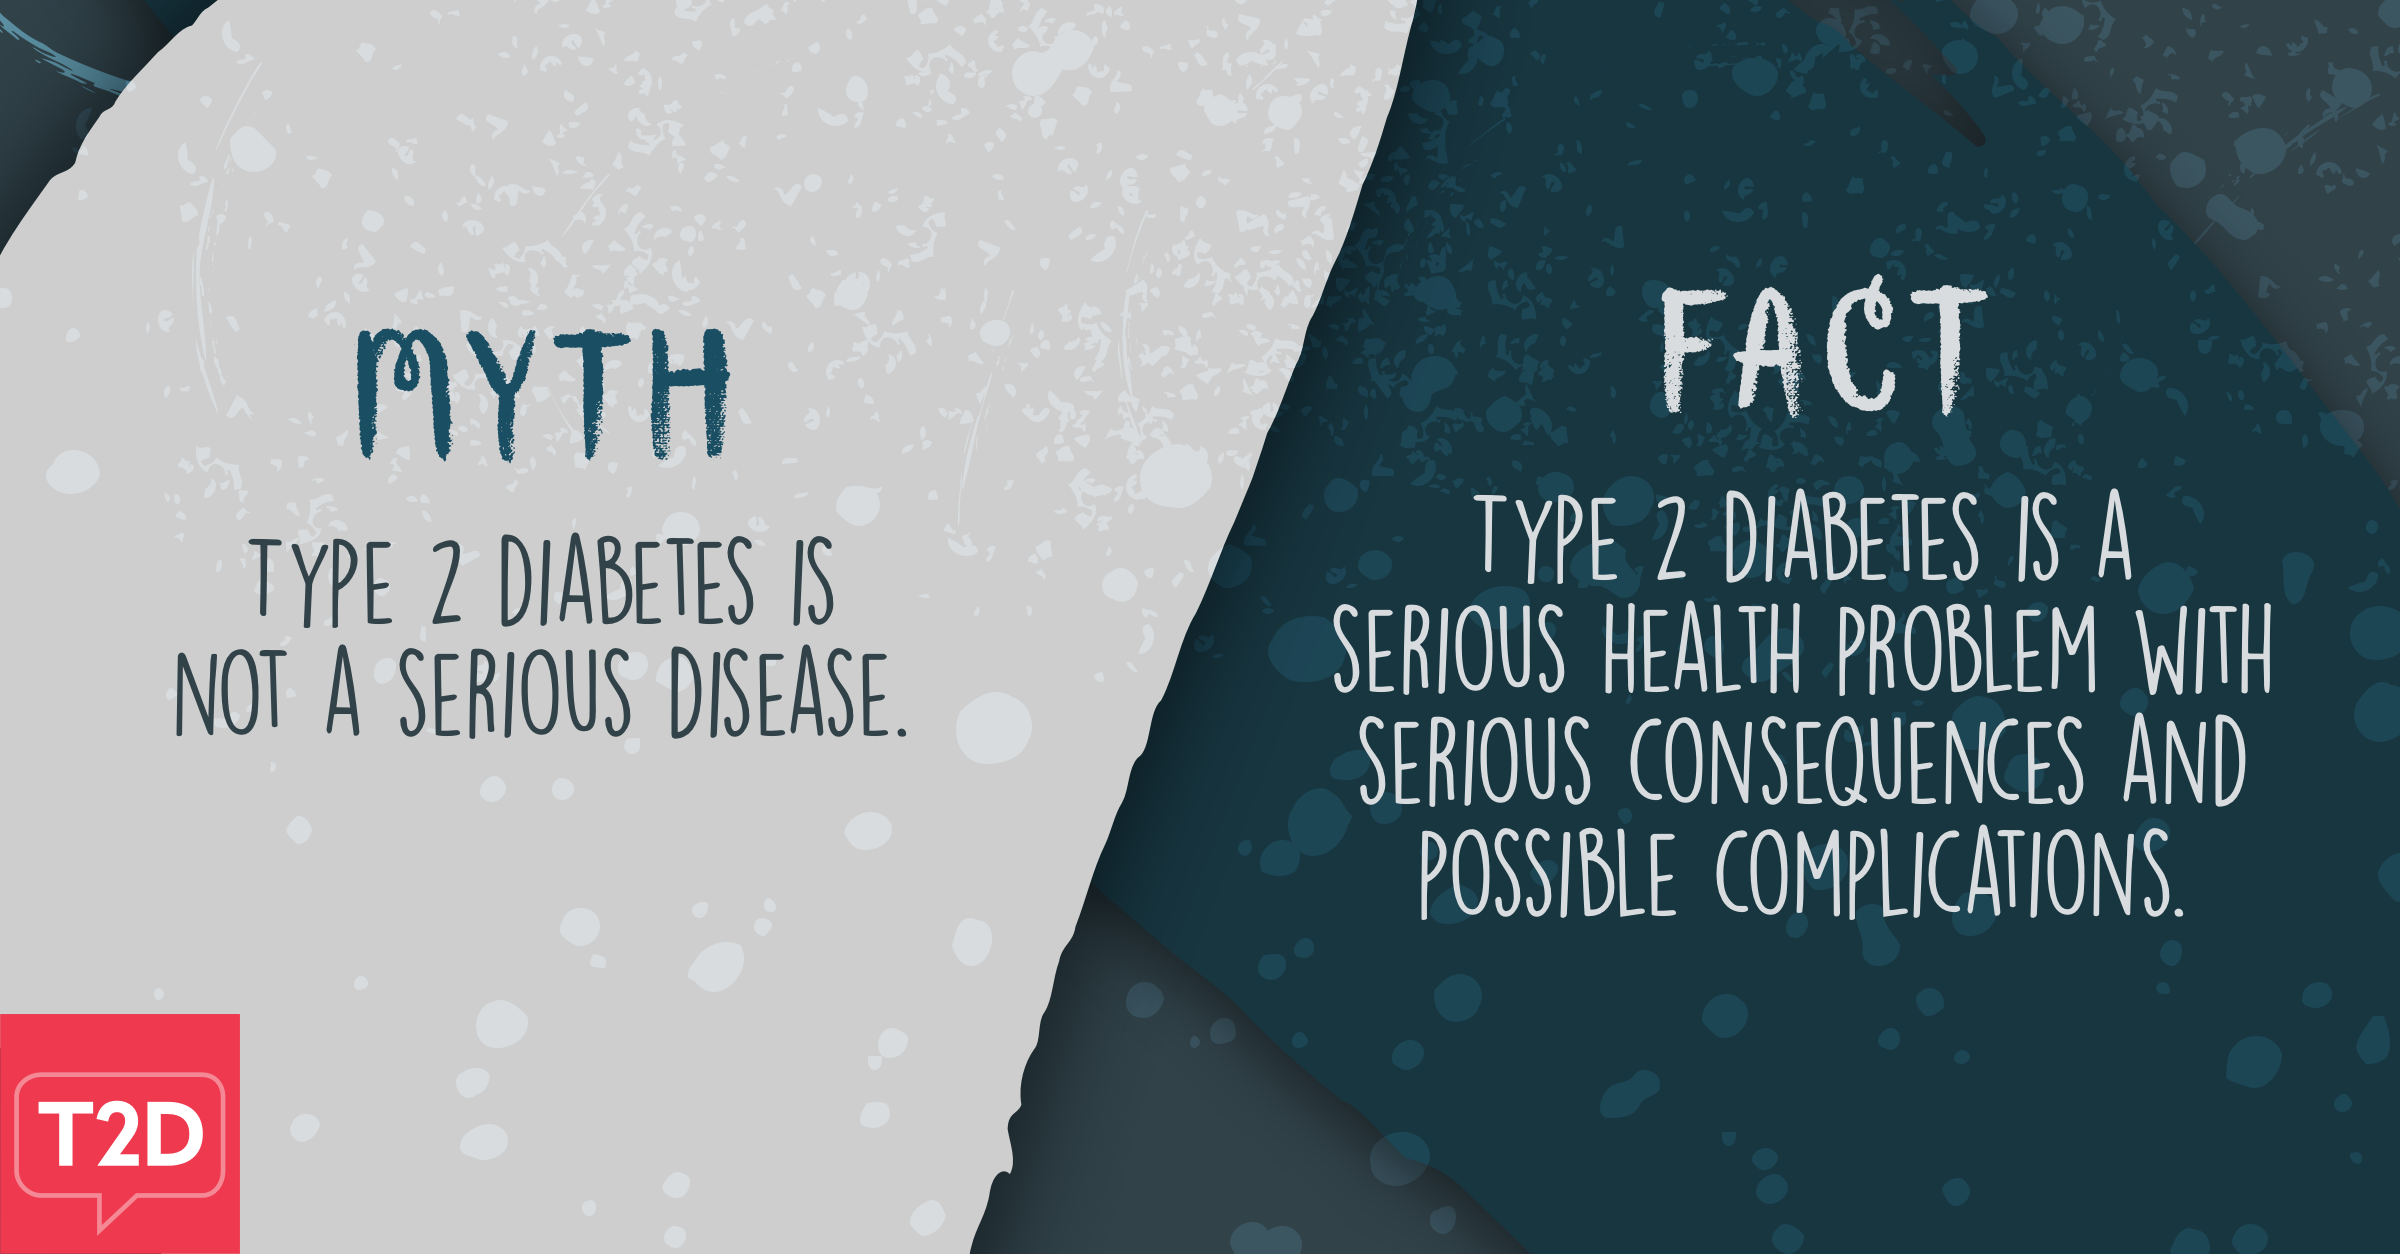 Myth: Type 2 diabetes is not a serious disease. Fact: Type 2 diabetes is a serious health problem with serious consequences and possible complications.